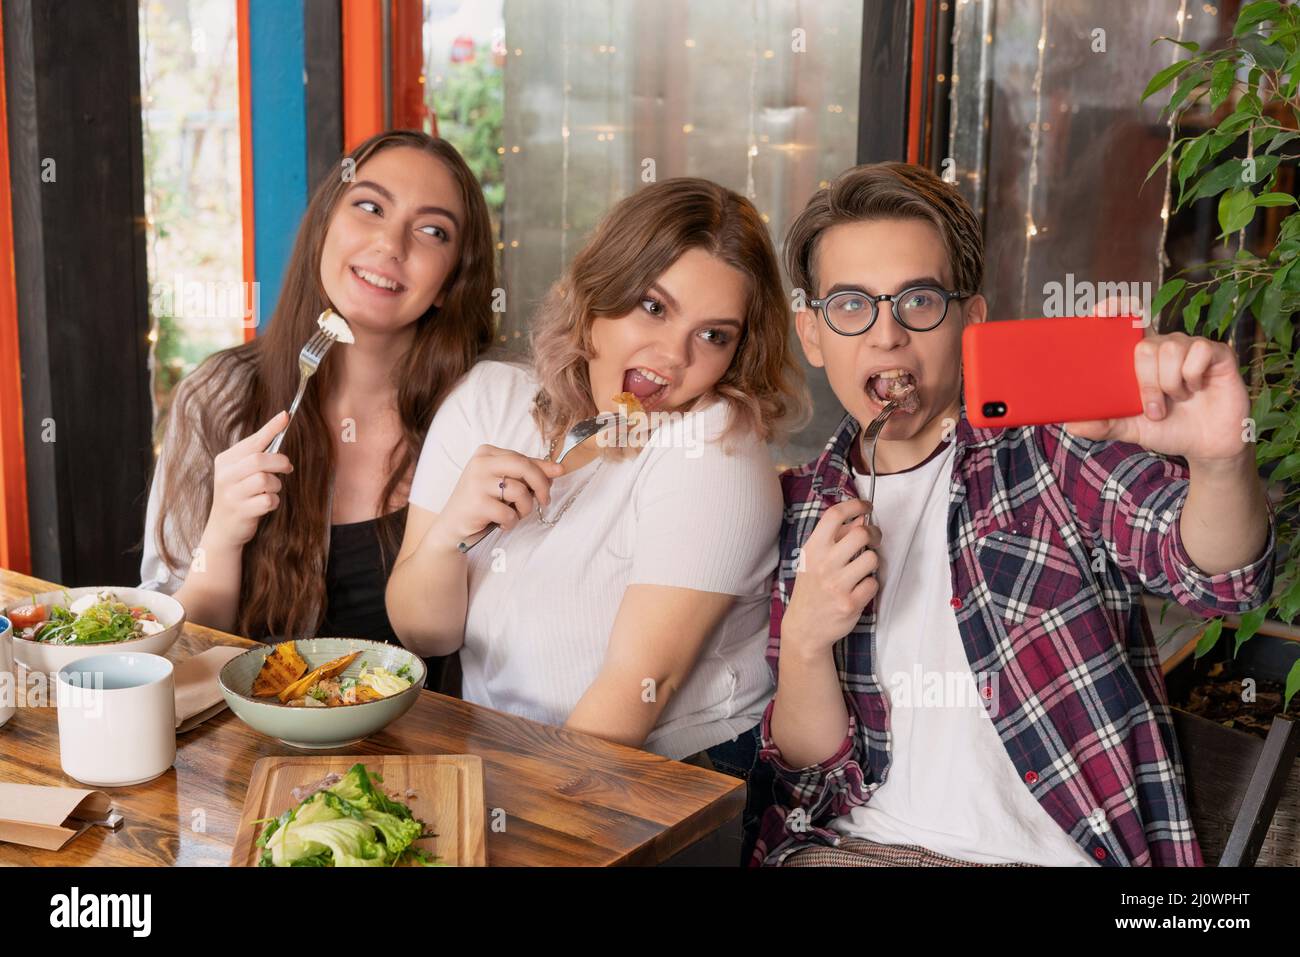 Freshmen in a cafe take a selfie. Teenage friends meeting for lunch. First year students spend leisure time together. Stock Photo